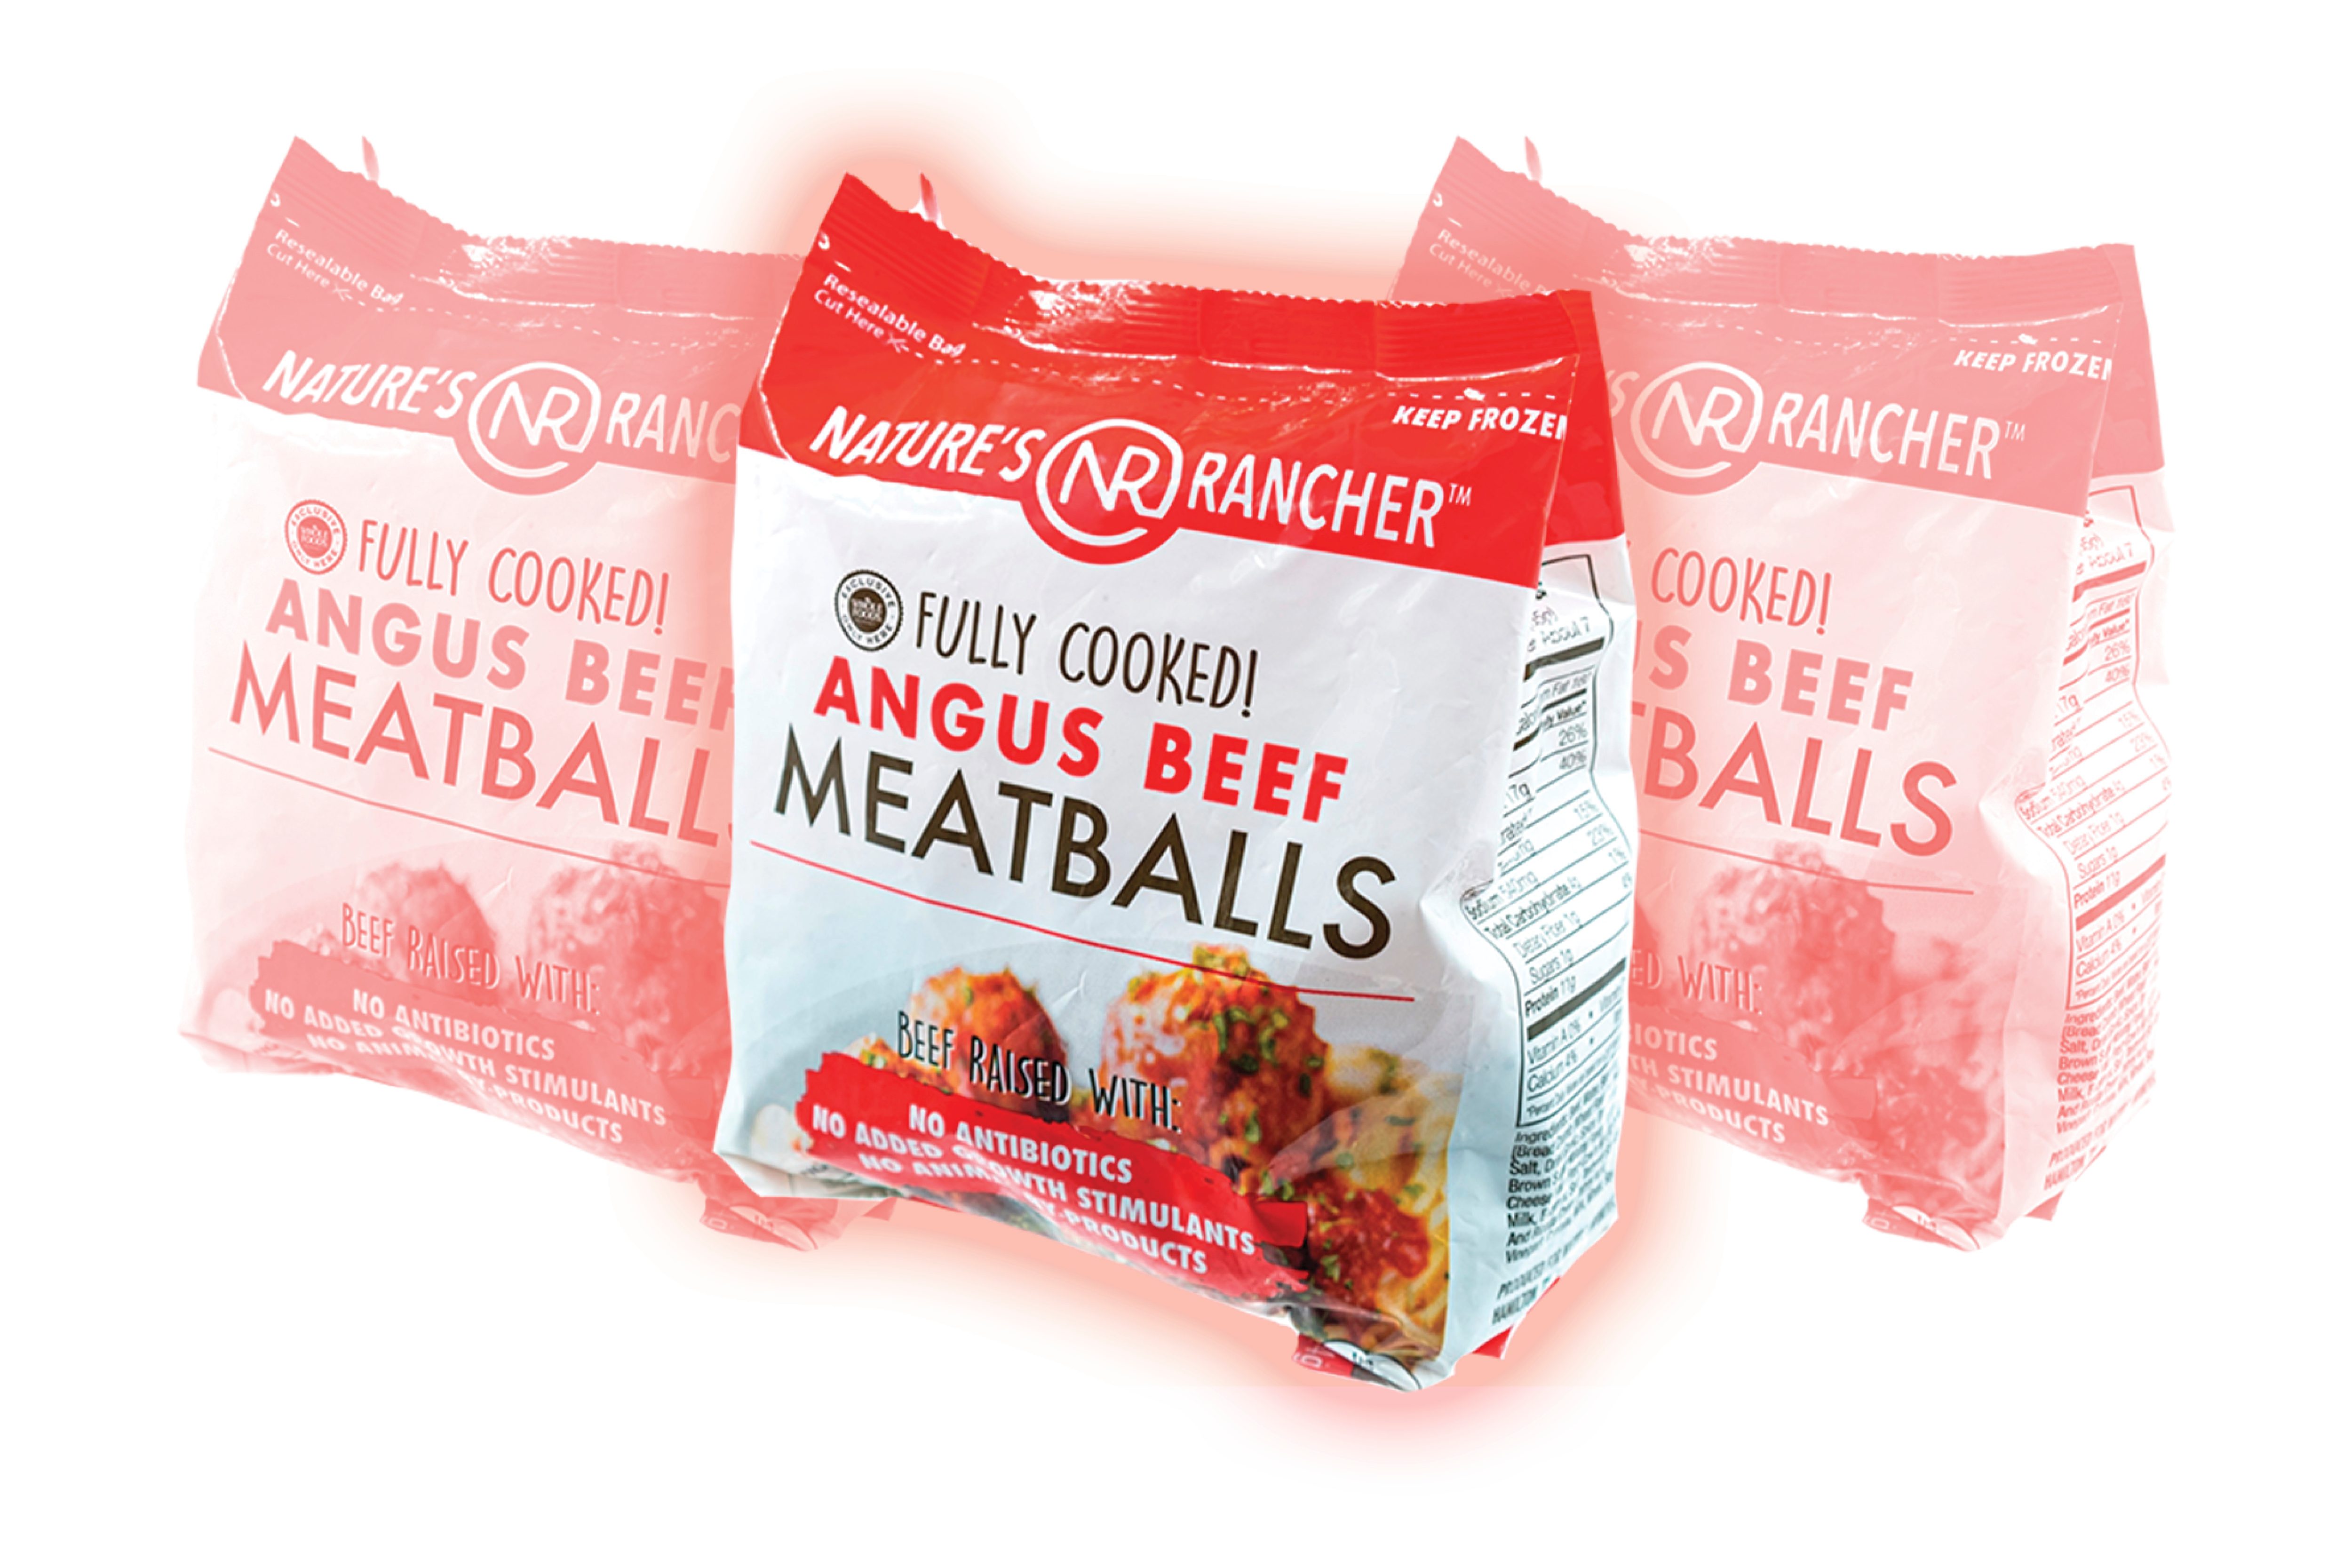 NATURE’S RANCHER FULLY COOKED ANGUS BEEF MEATBALLS -22 OZ